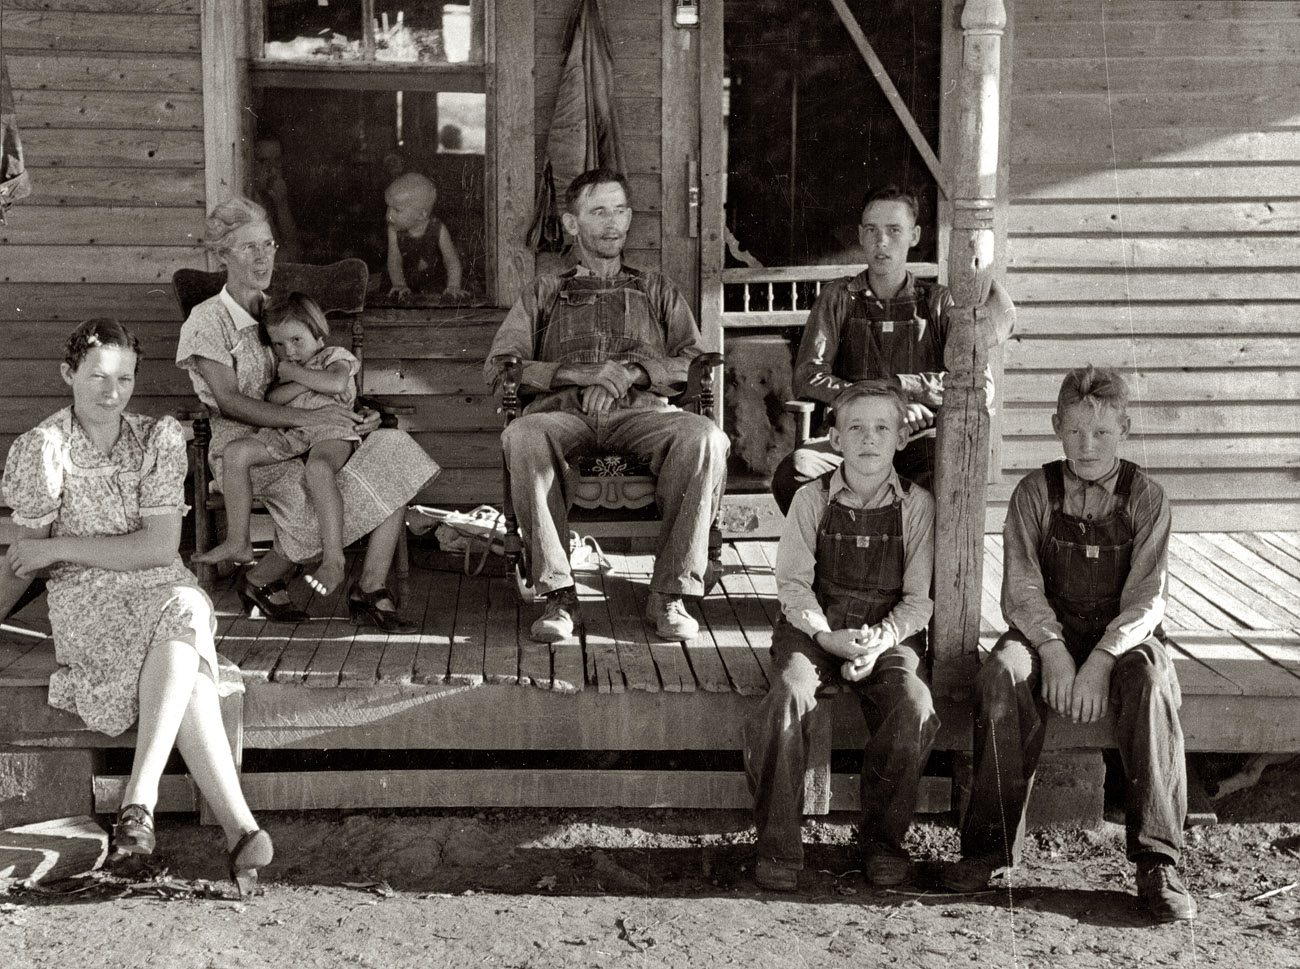 August 1938. "Farm Security Administration client who will become owner- operator under tenant purchase program. Caruthersville, Missouri." This group shot includes the haircut brothers from today's earlier post. 35mm nitrate negative by Russell Lee for the Farm Security Administration. View full size.